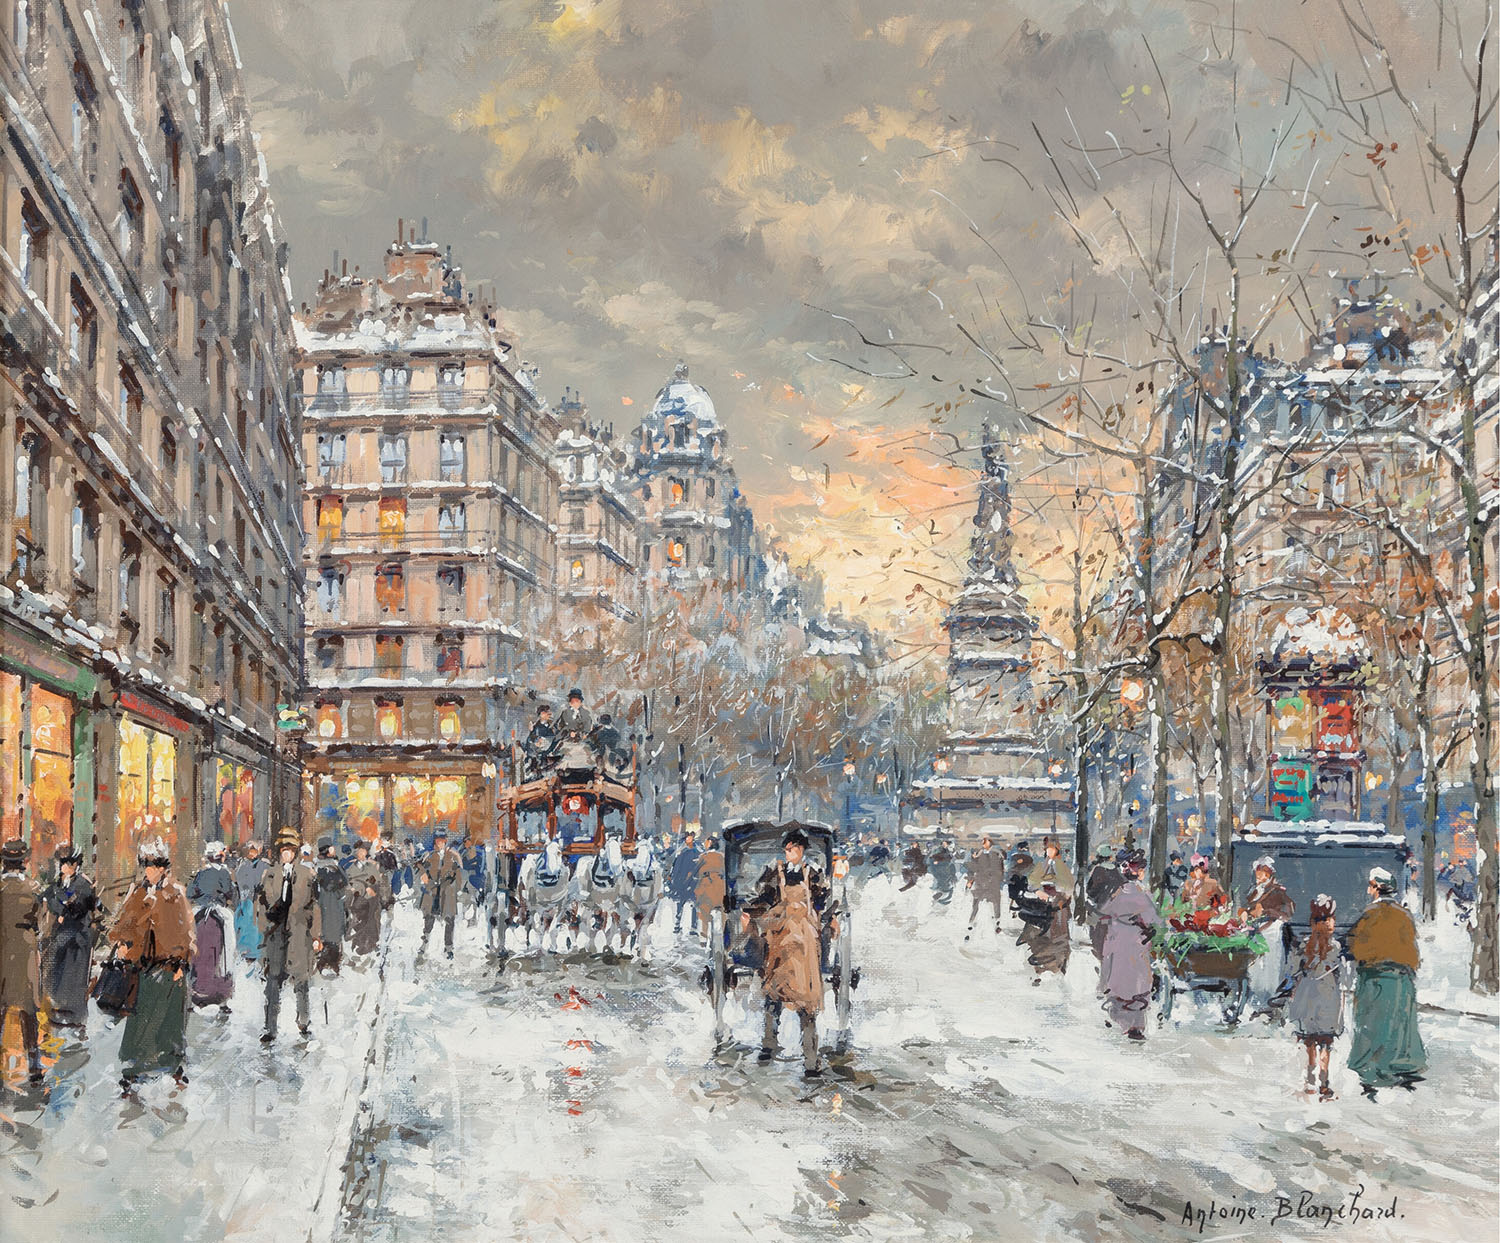 oil painting of place clichy in paris, clichy monument, snow, horses, cart and people in street